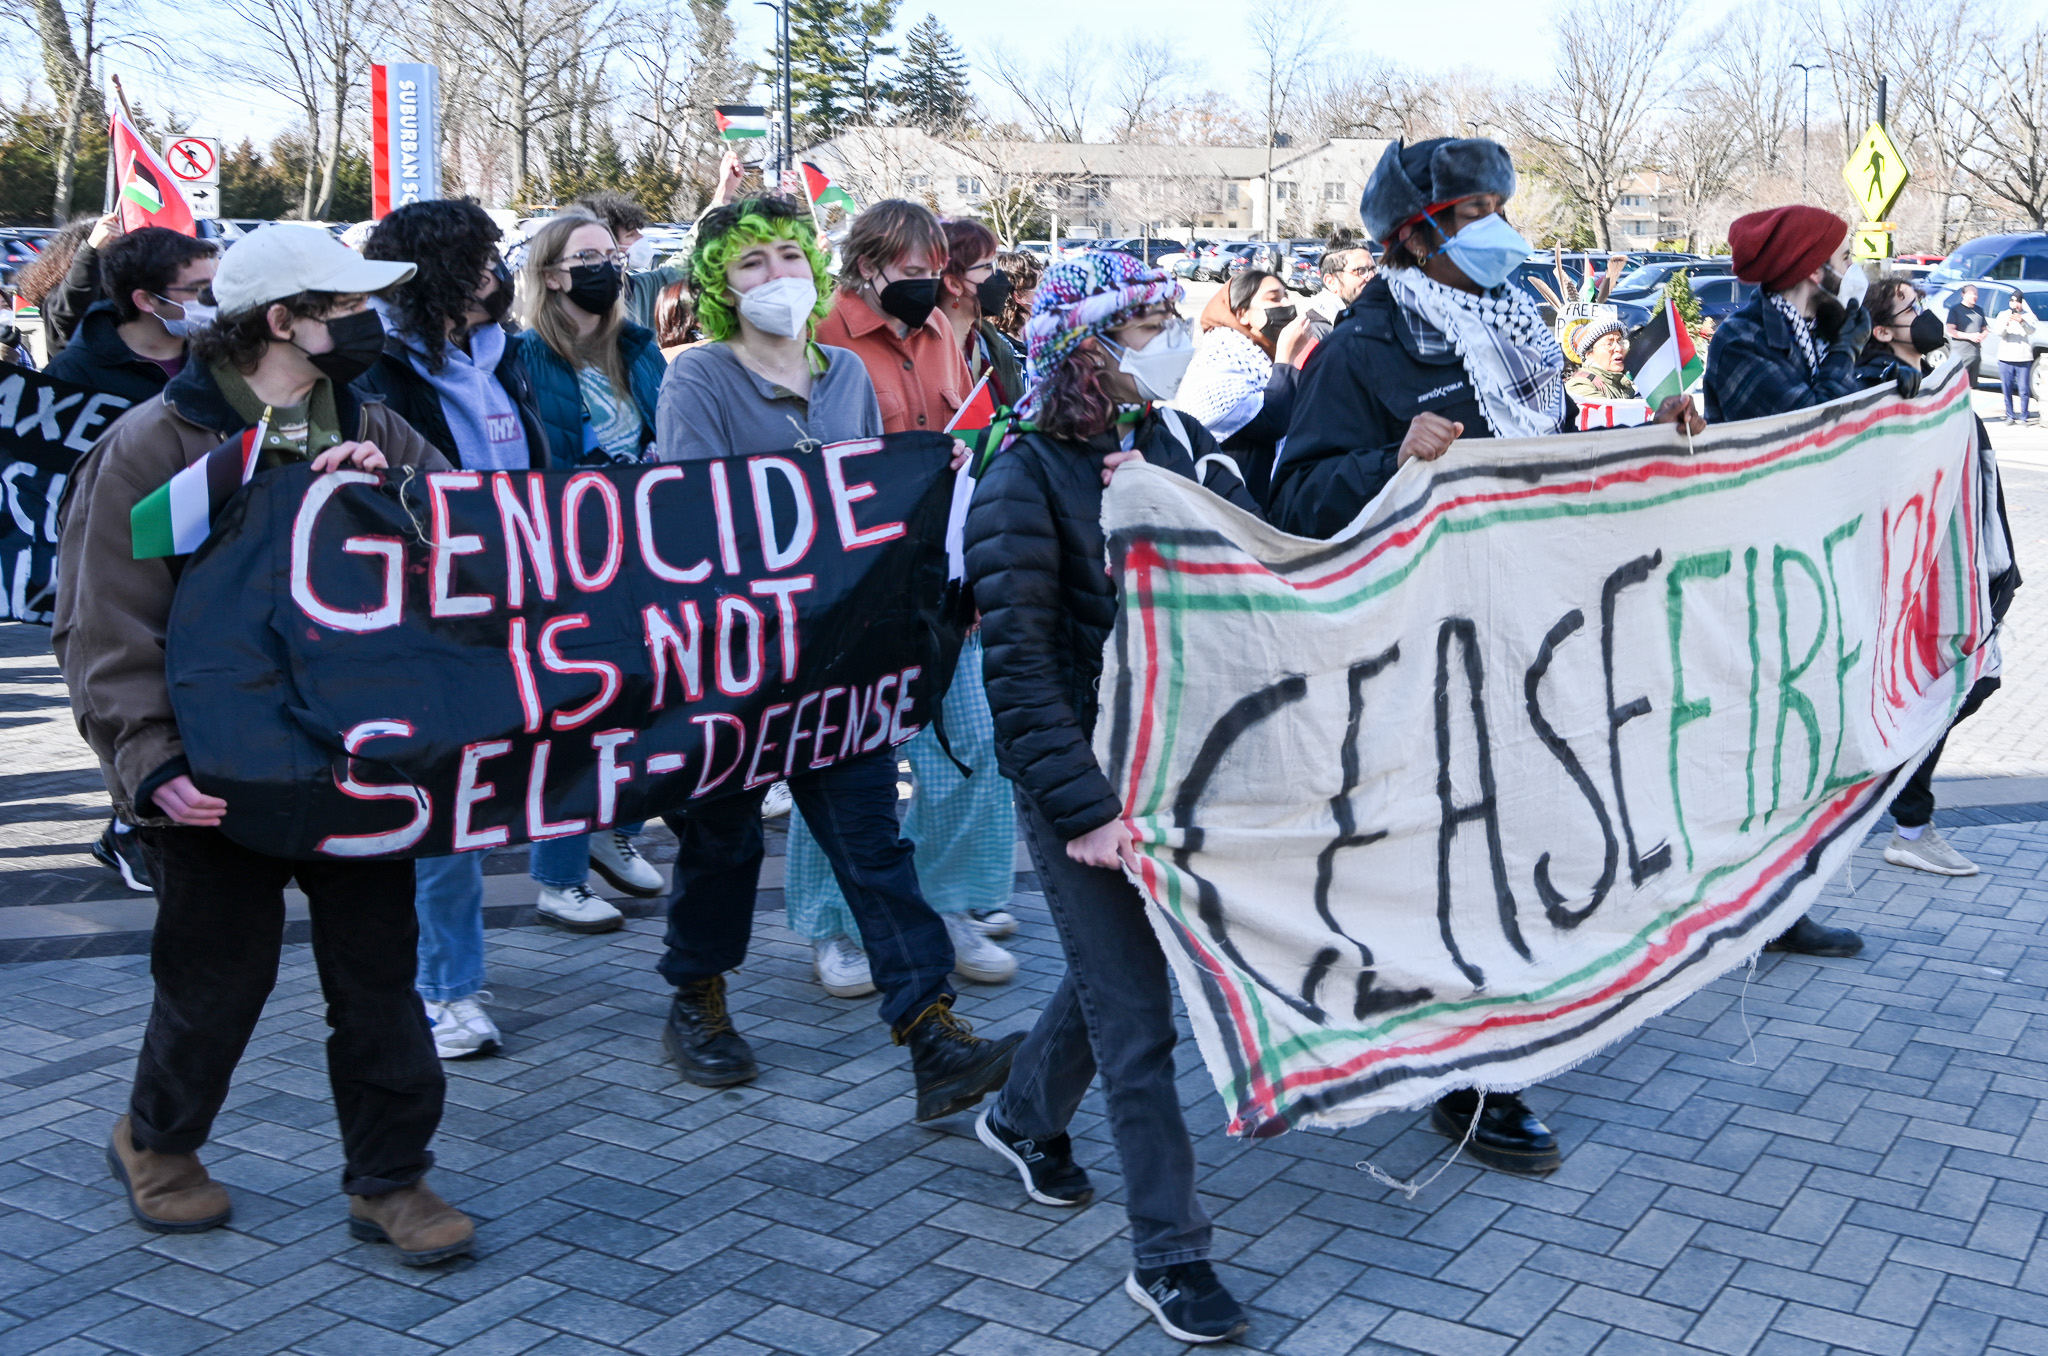 Pro-Palestinian protests are taking place on university campuses across the US and other parts of the world. : Flickr: Joe Piette CC BY-NC-SA 2.0